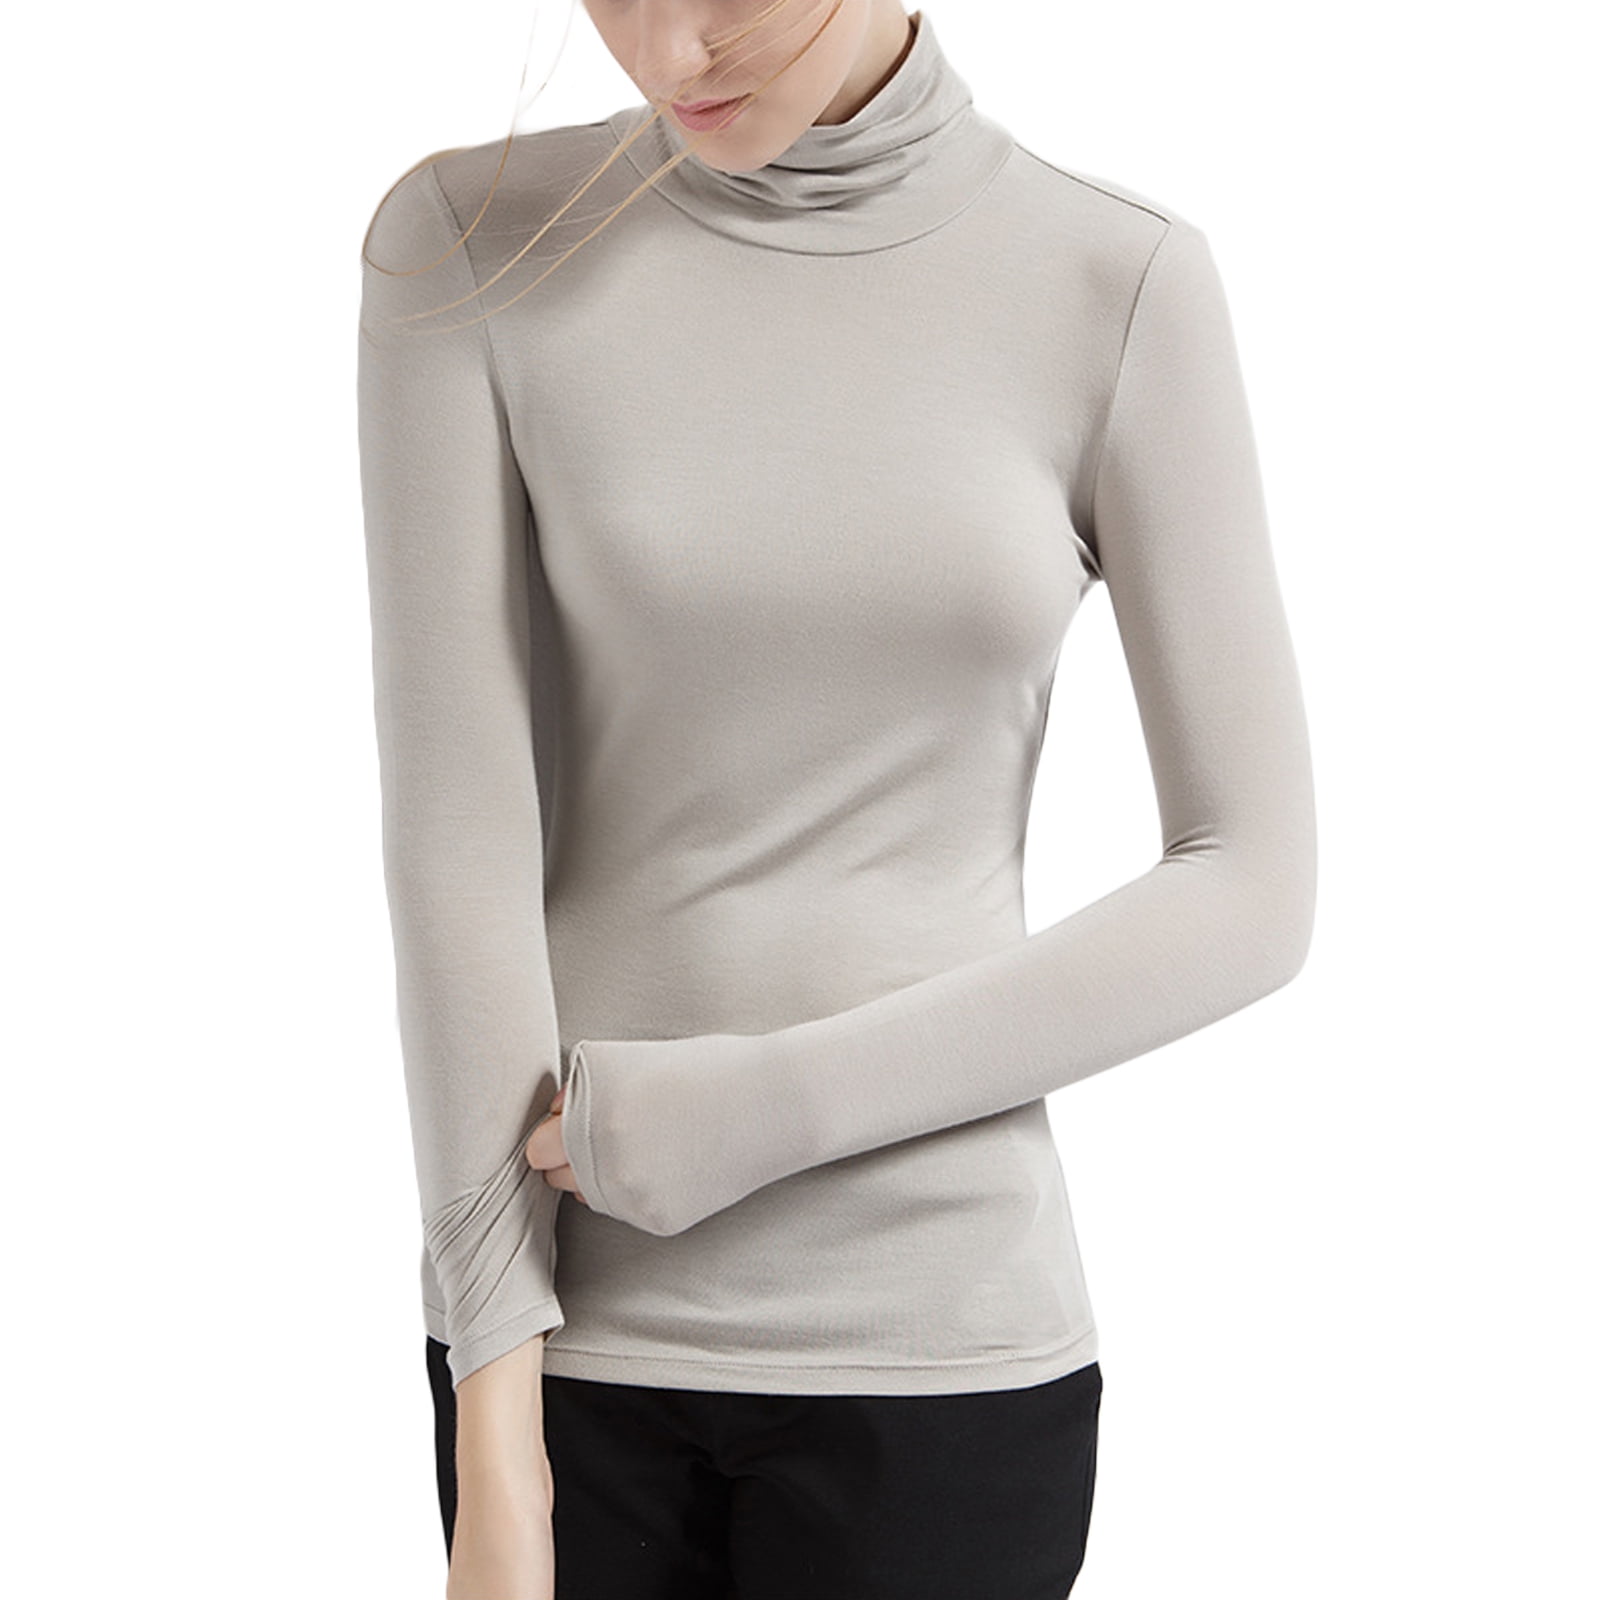 Sleeve Long Women\'s Musuos Modal Shirts Soft Tops Turtleneck Fitted Base Slim Layer Stretchy Pullover, Base